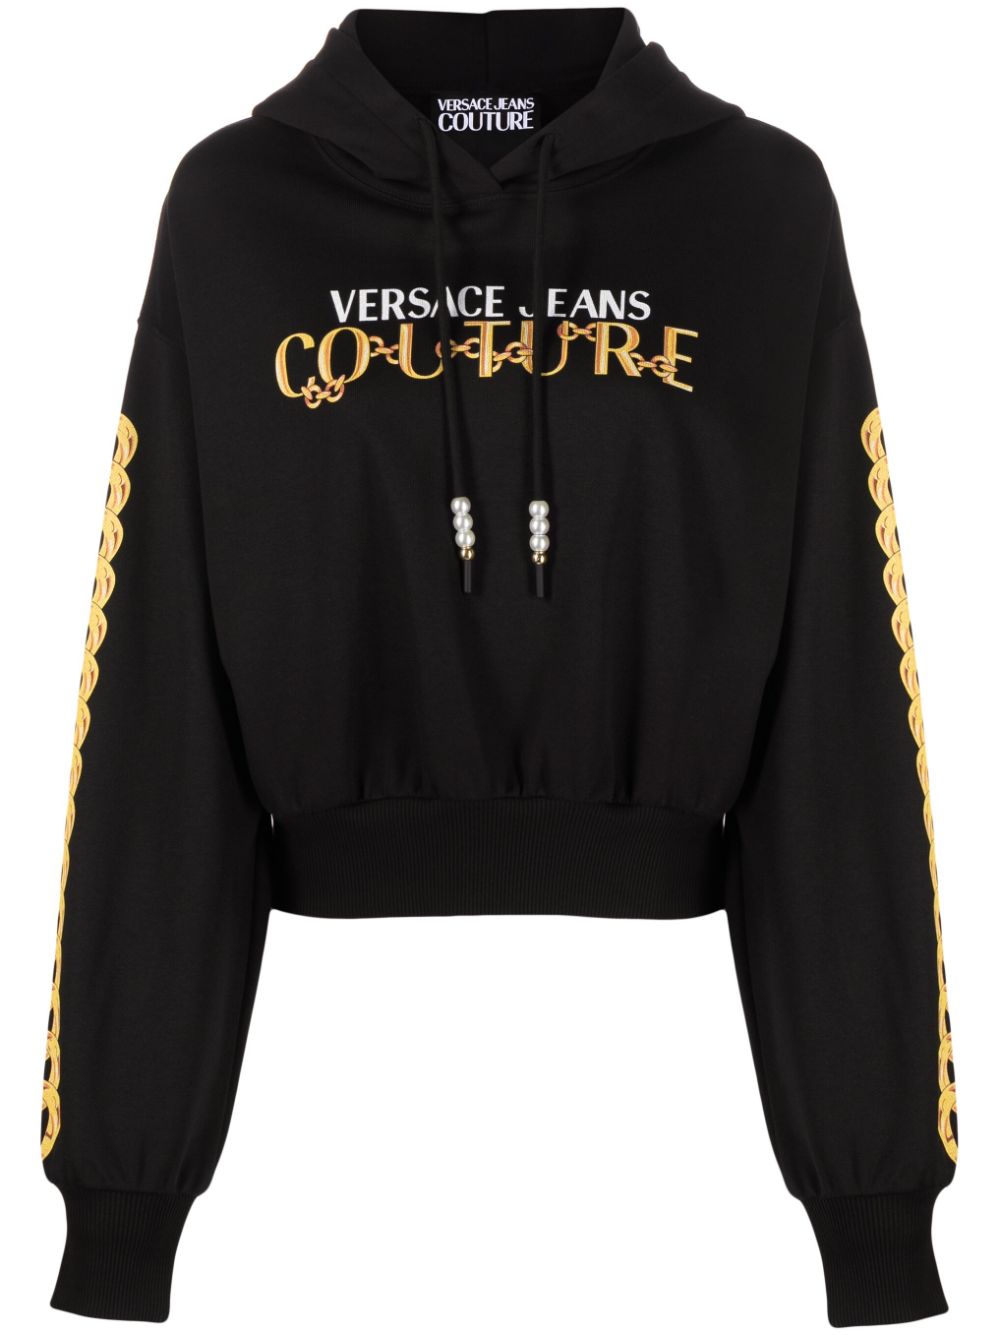 Versace Jeans Couture Hemd mit Couture-Print - Schwarz von Versace Jeans Couture